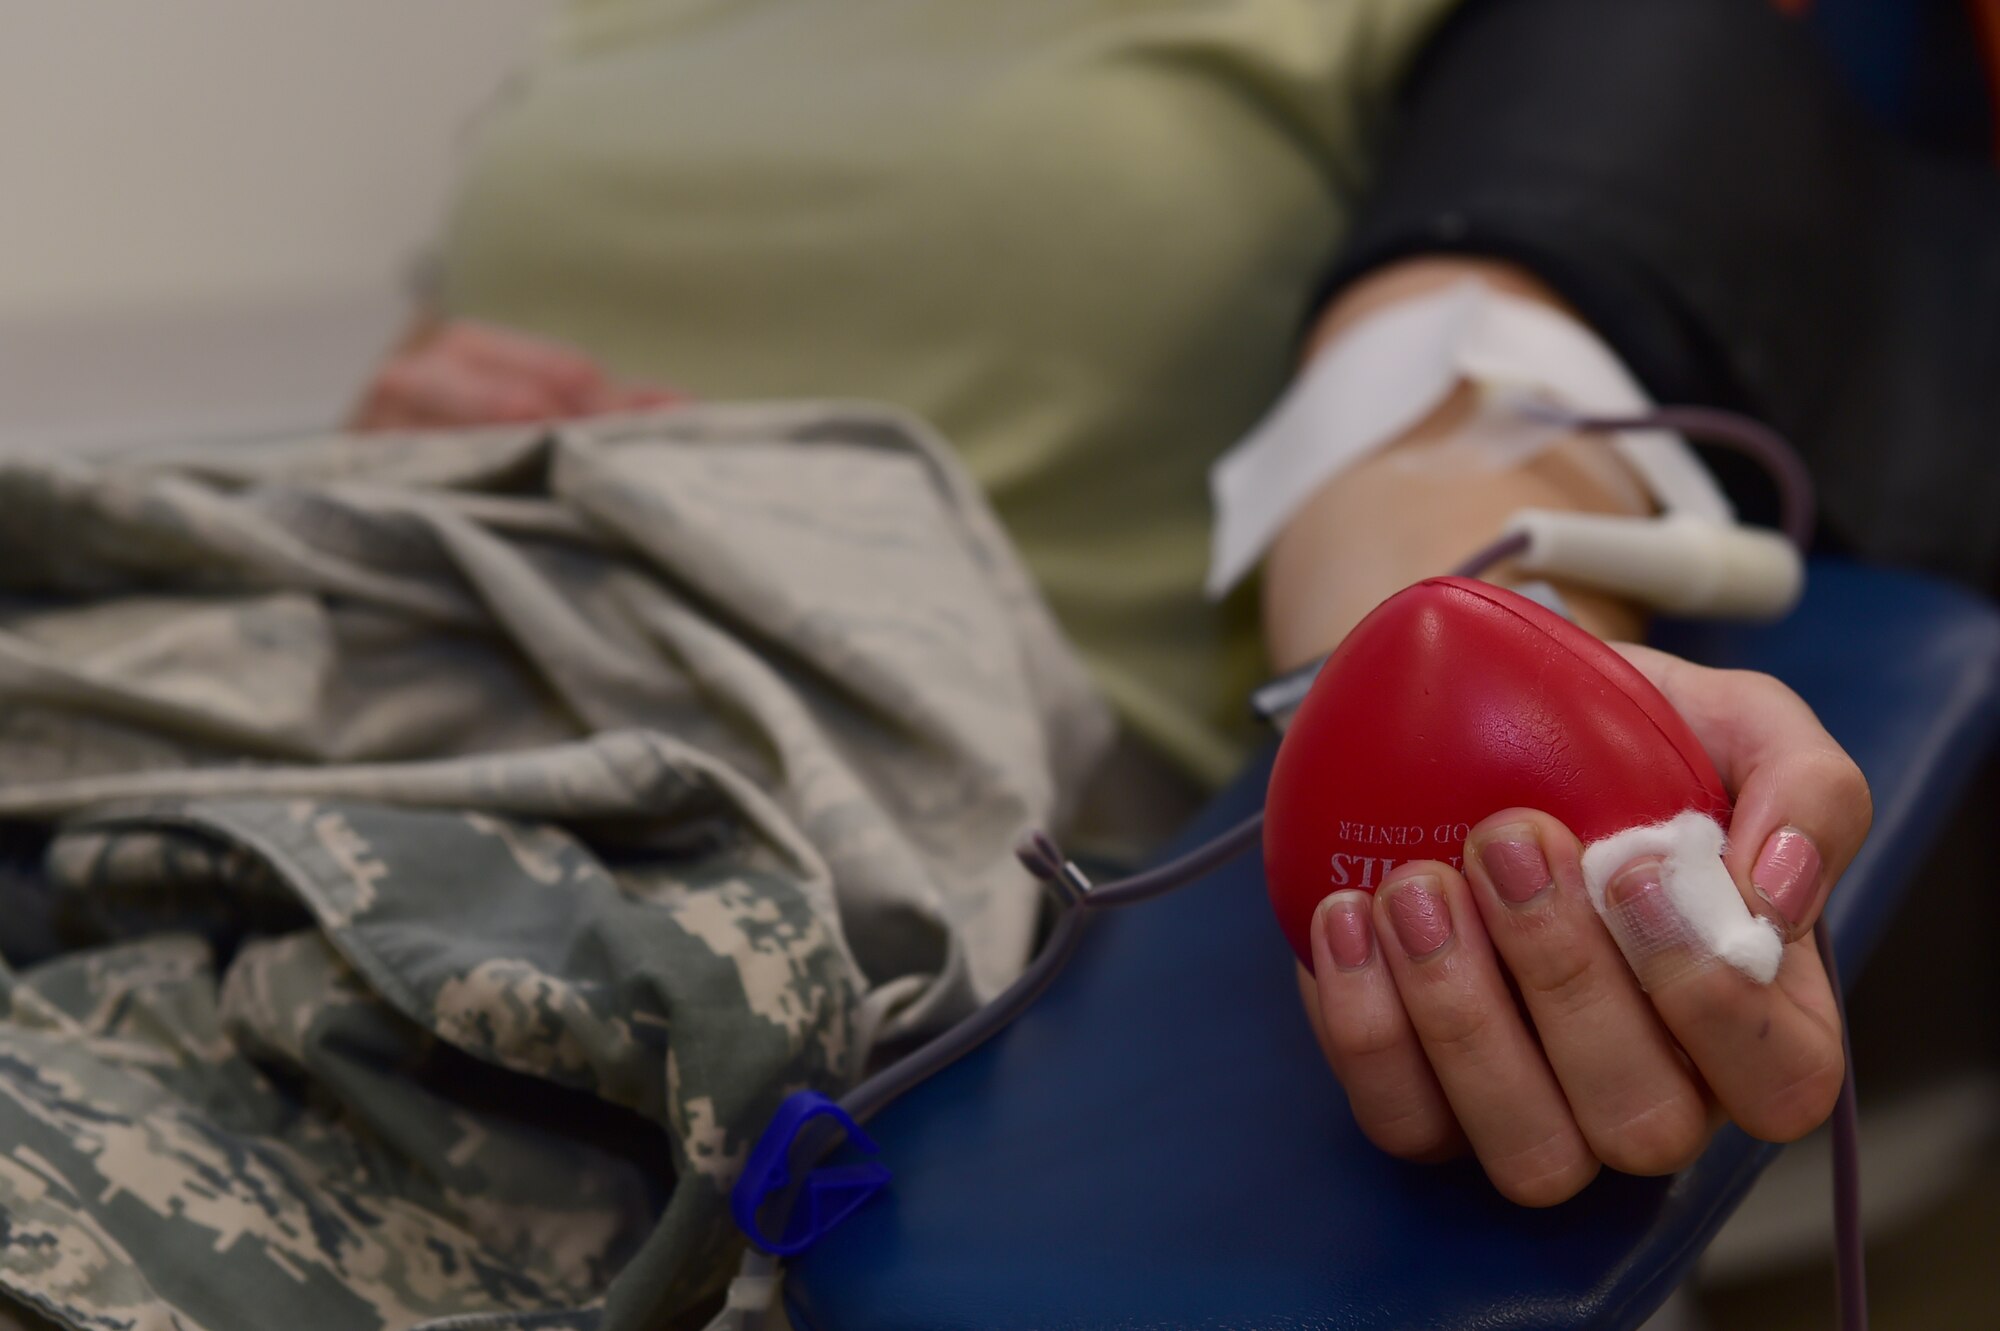 Team Buckley members participate in a blood drive hosted by Bonfils Blood Center Sept. 2, 2015, on Buckley Air Force Base, Colo. The blood drive looks is hosted awareness and donations for those in need. (U.S. Air Force photo by Airman 1st Class Luke W. Nowakowski/Released)